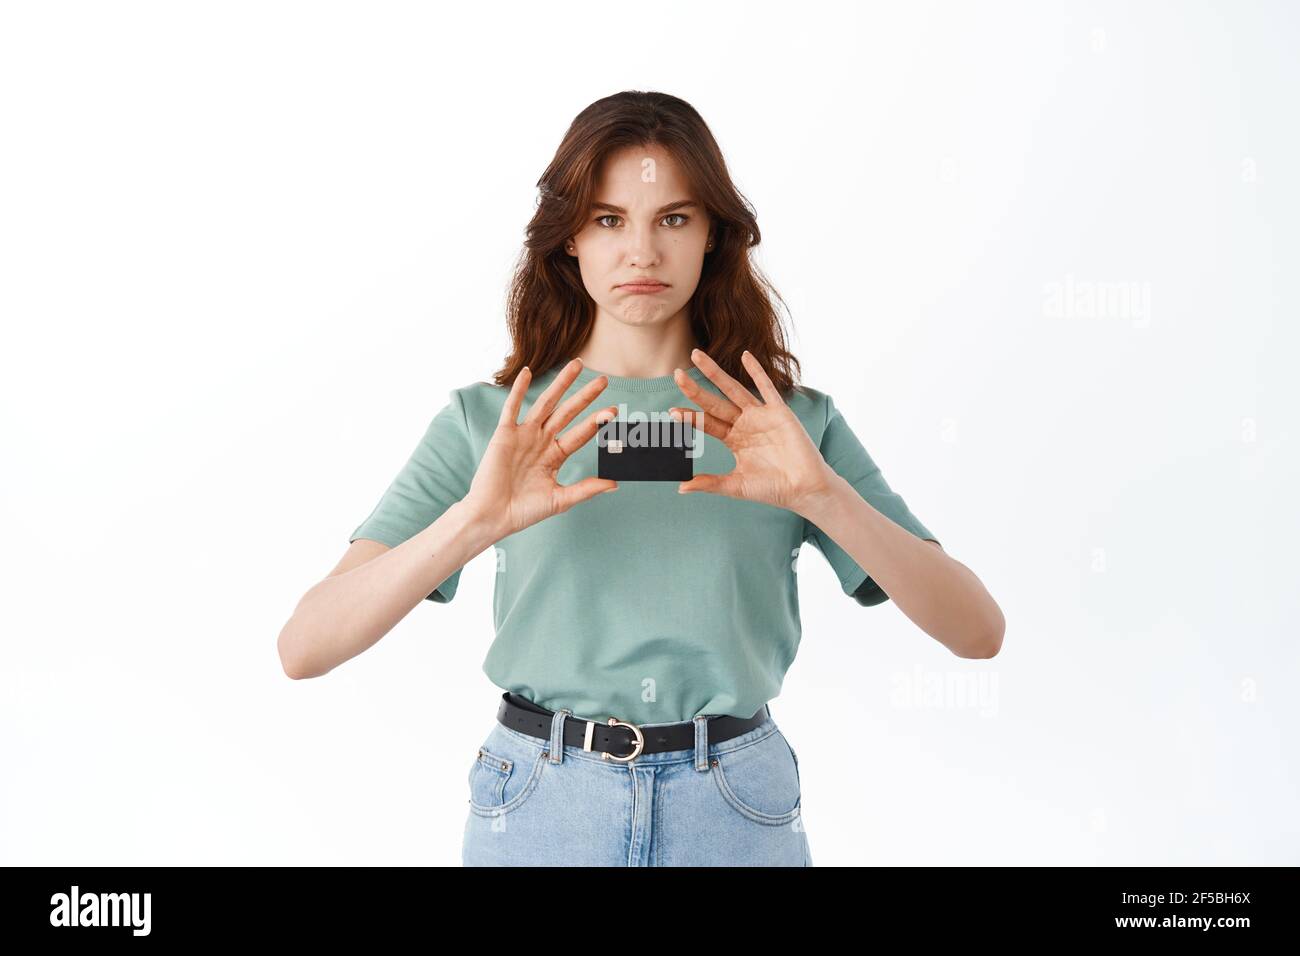 Sad young woman in t-shirt showing her plastic credit card and grimacing upset, having bad mood, standing disappointed against white background Stock Photo